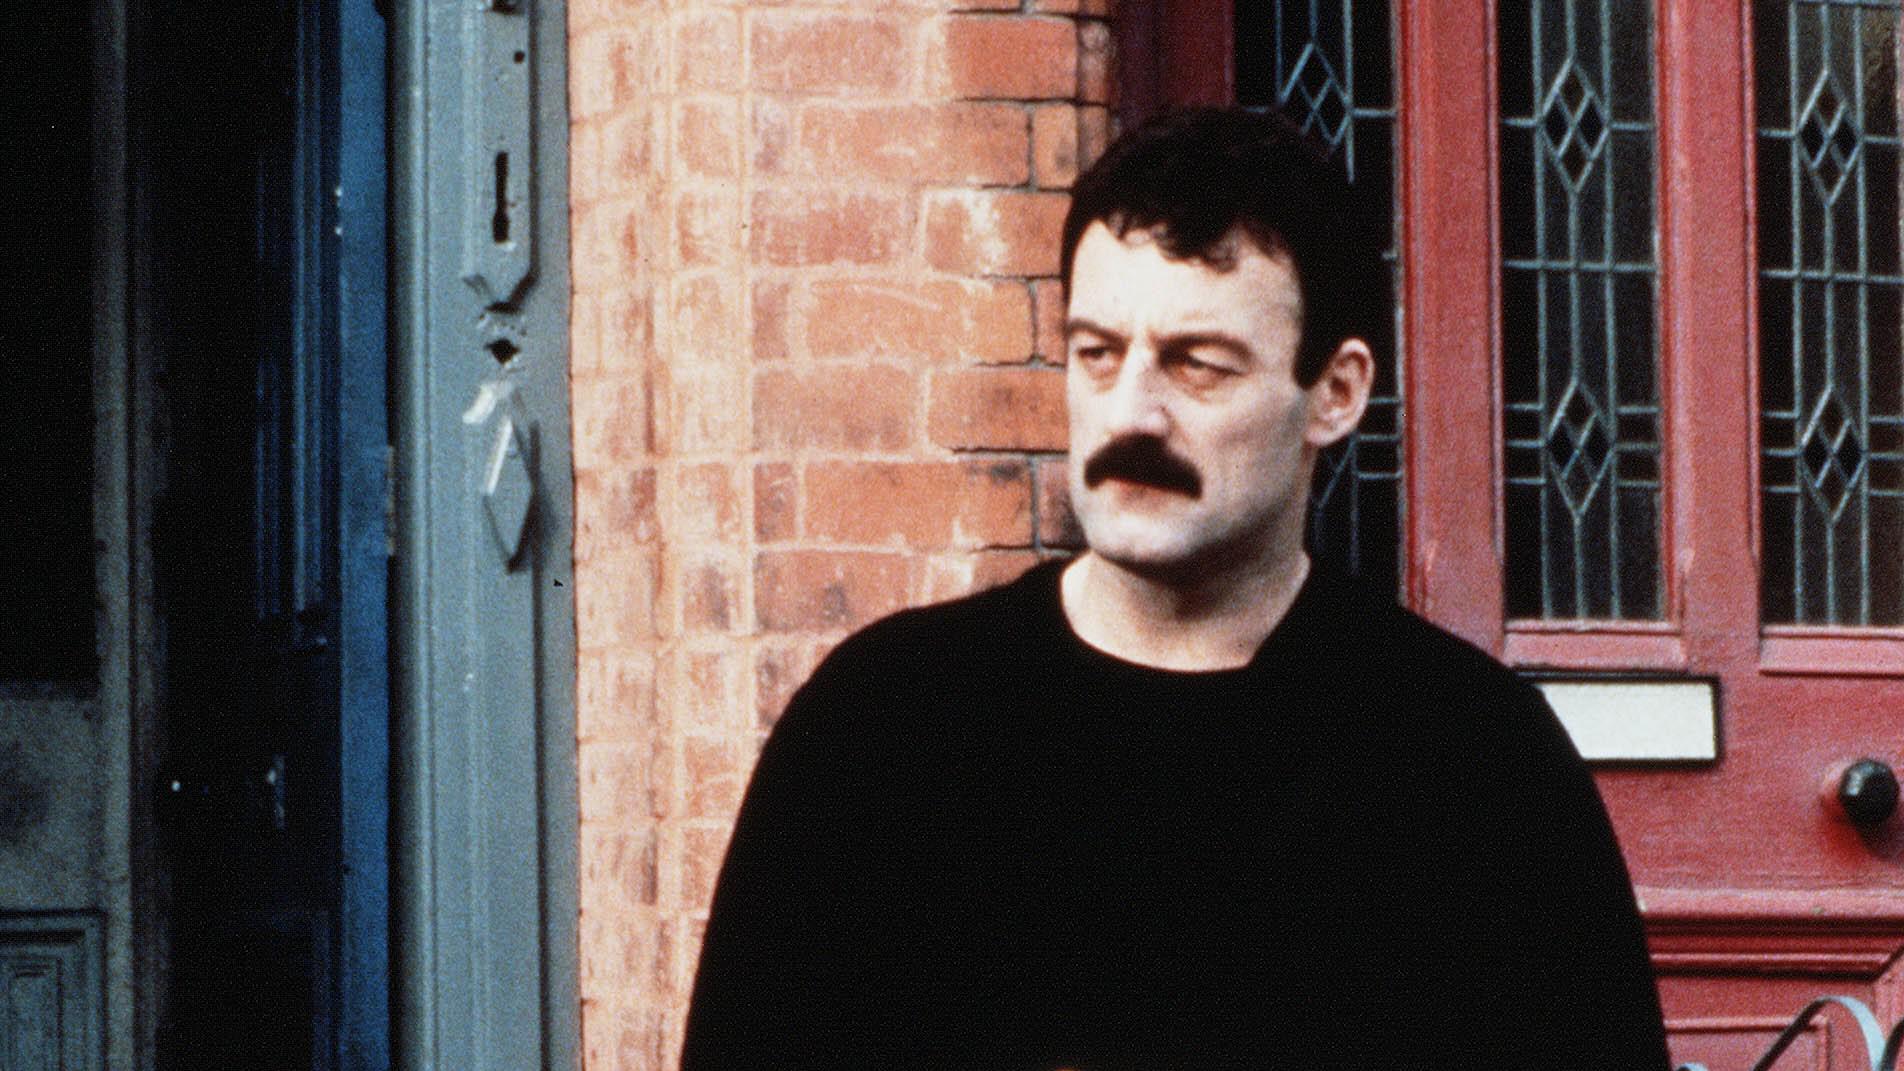 Hill as Yosser Hughes in Boys from the Blackstuff